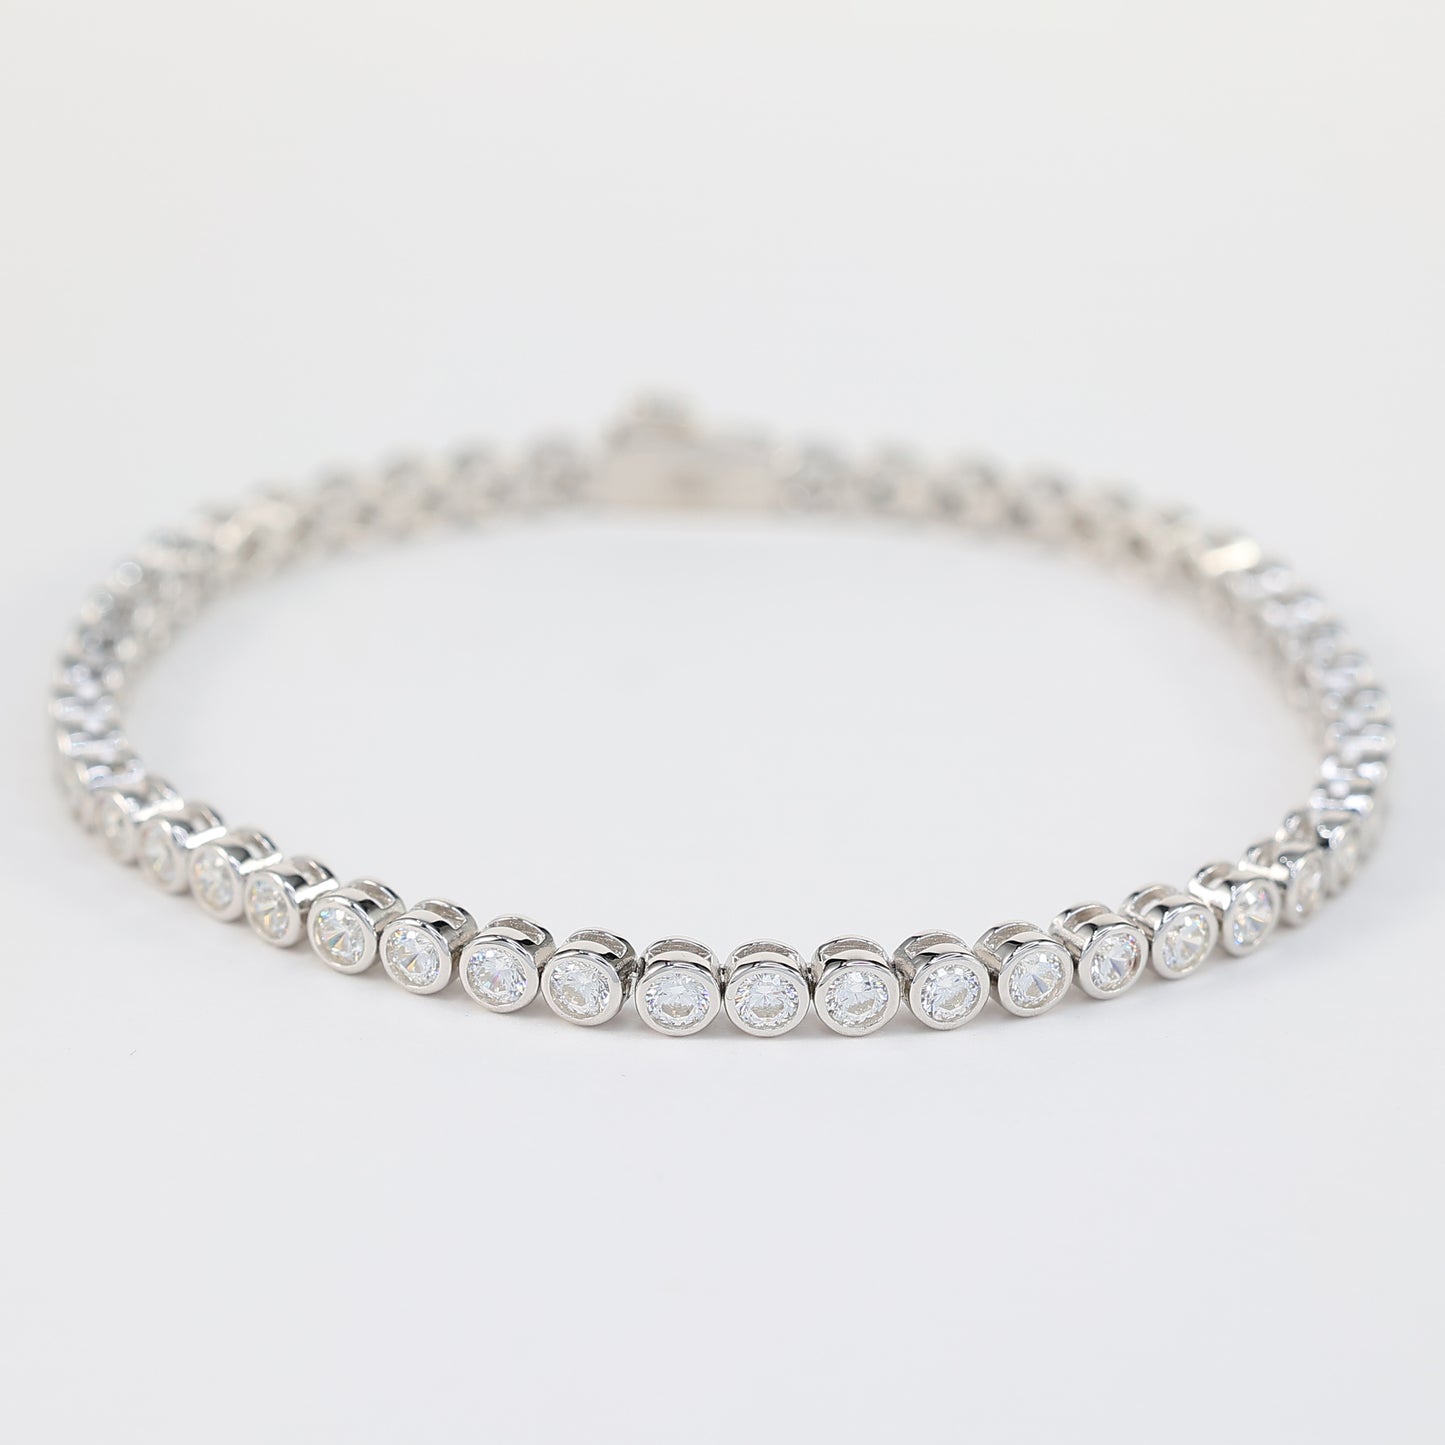 Bezel-setting Lab created stones fully studded Bubble chain bracelet, sterling silver